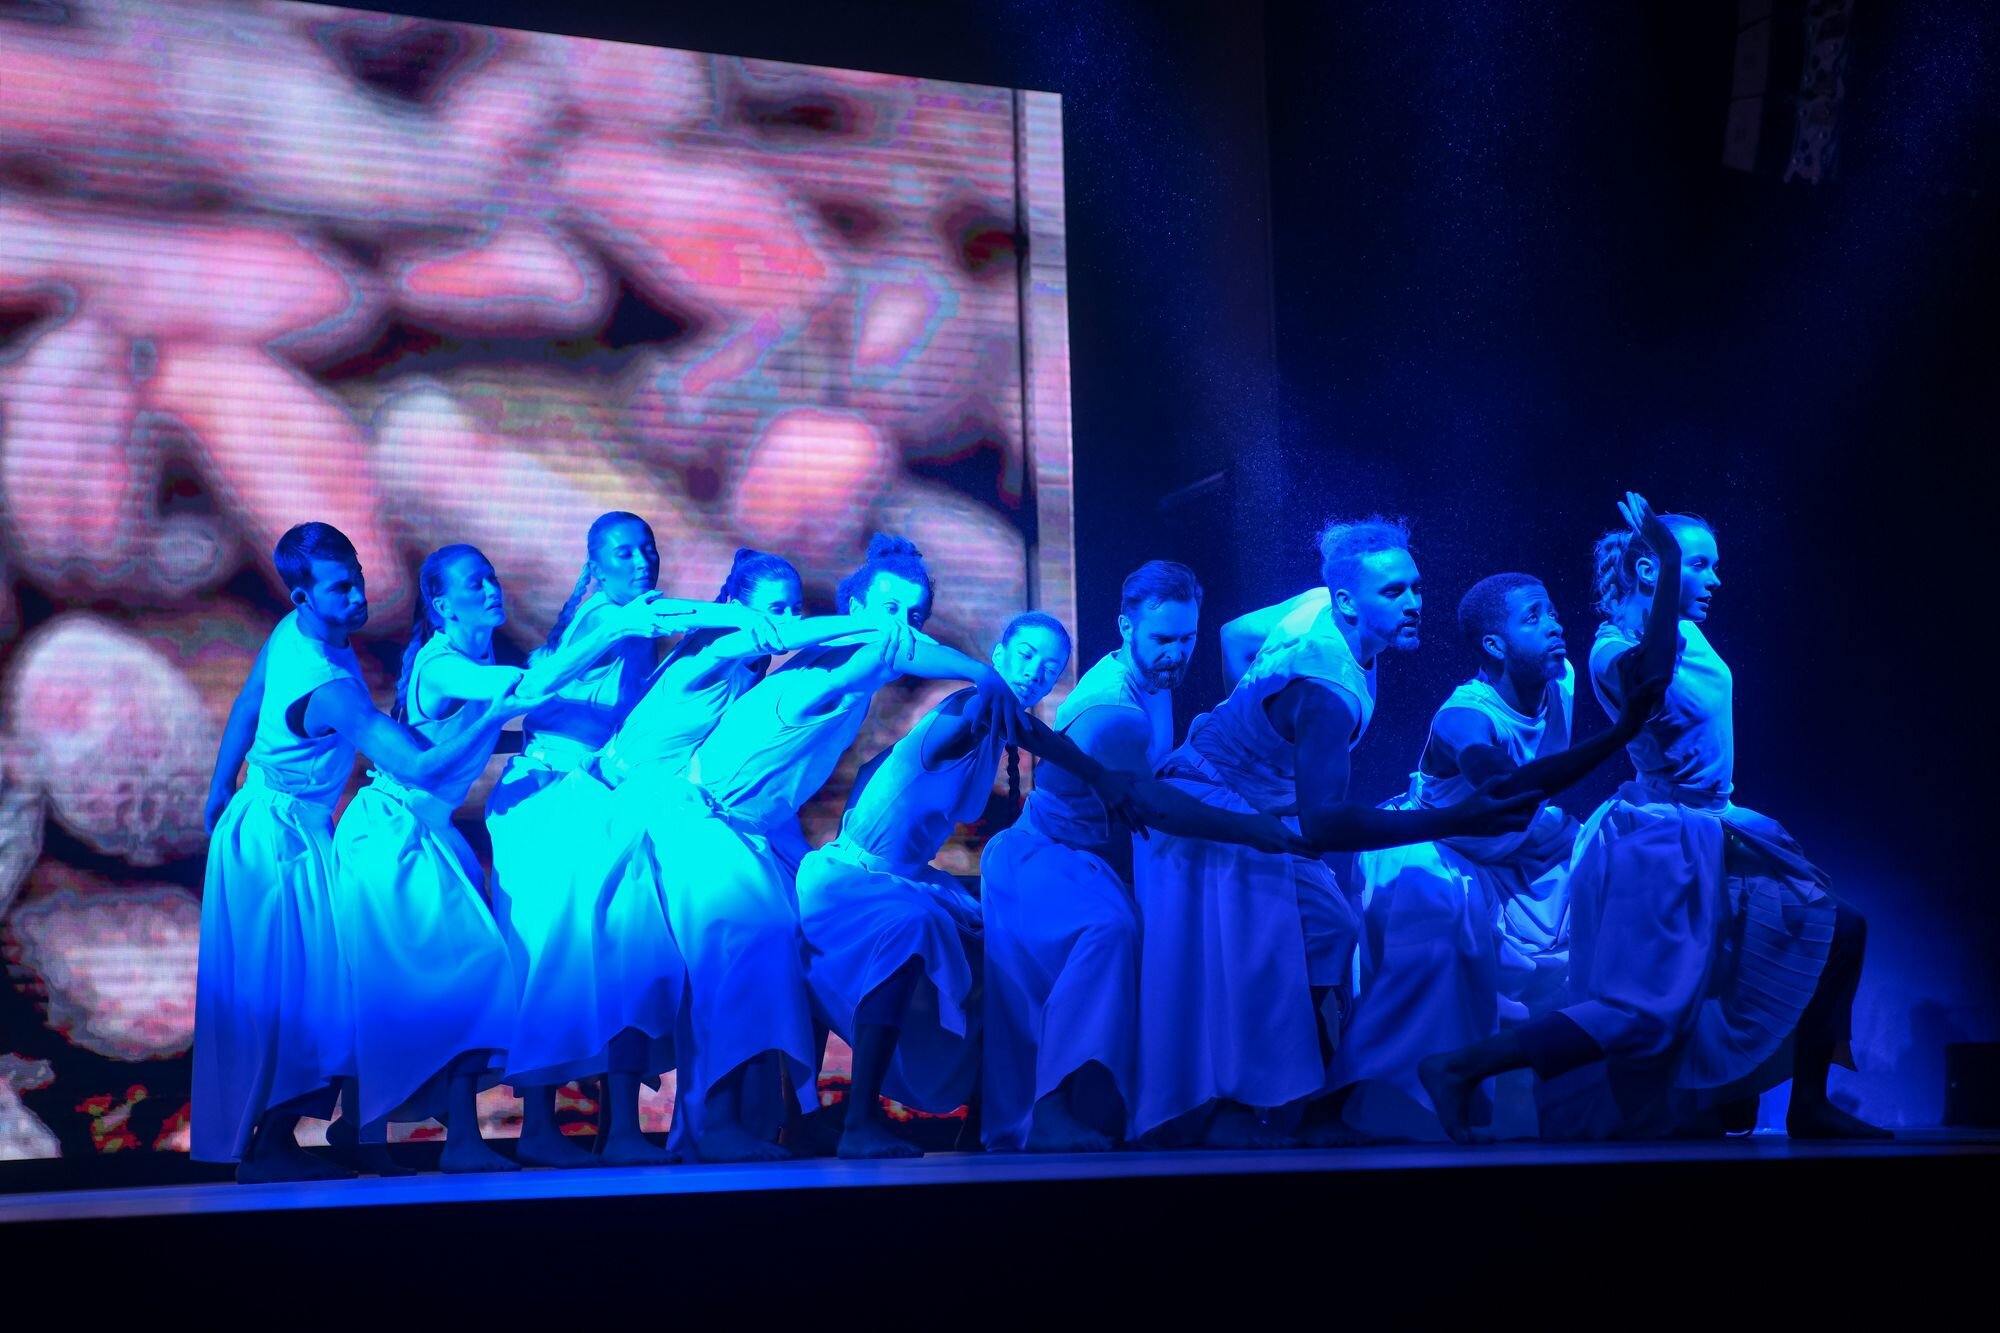  10 dancers create a wave of motion with their bodies, captured in a moody blue lighting state. 